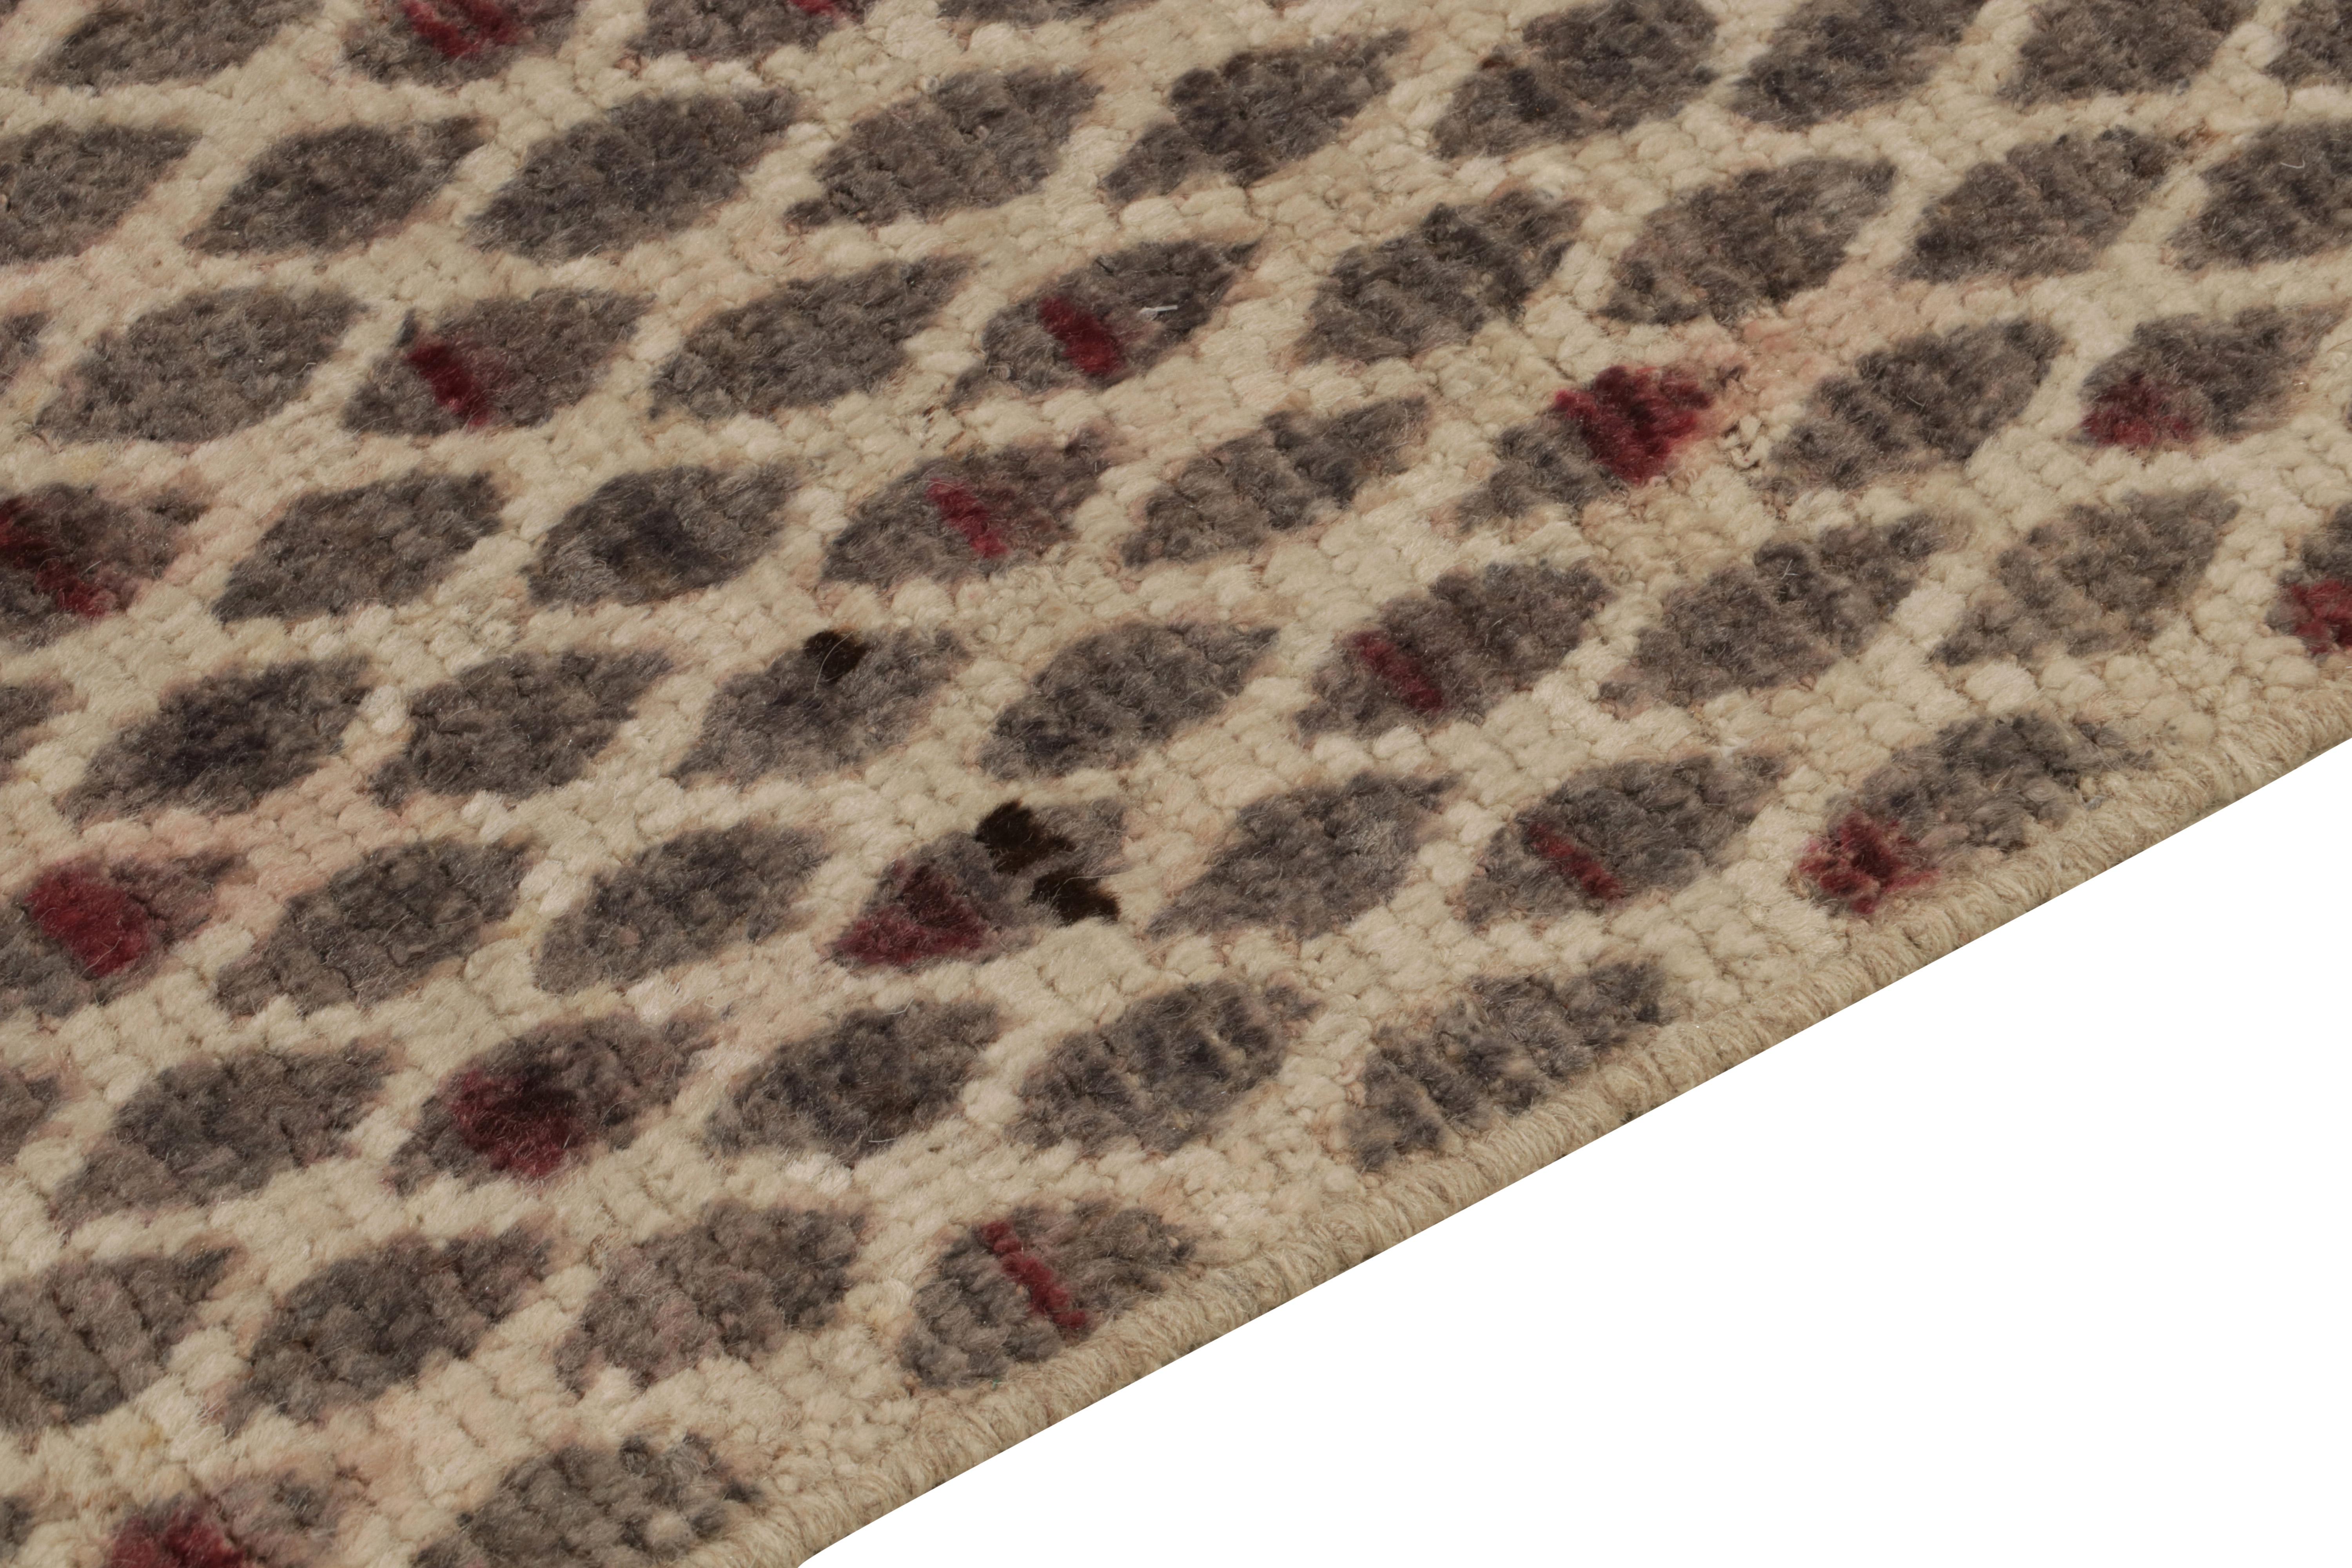 Rug & Kilim's Contemporary Moroccan Style Runner in Beige-Brown, Grey & Red In New Condition For Sale In Long Island City, NY